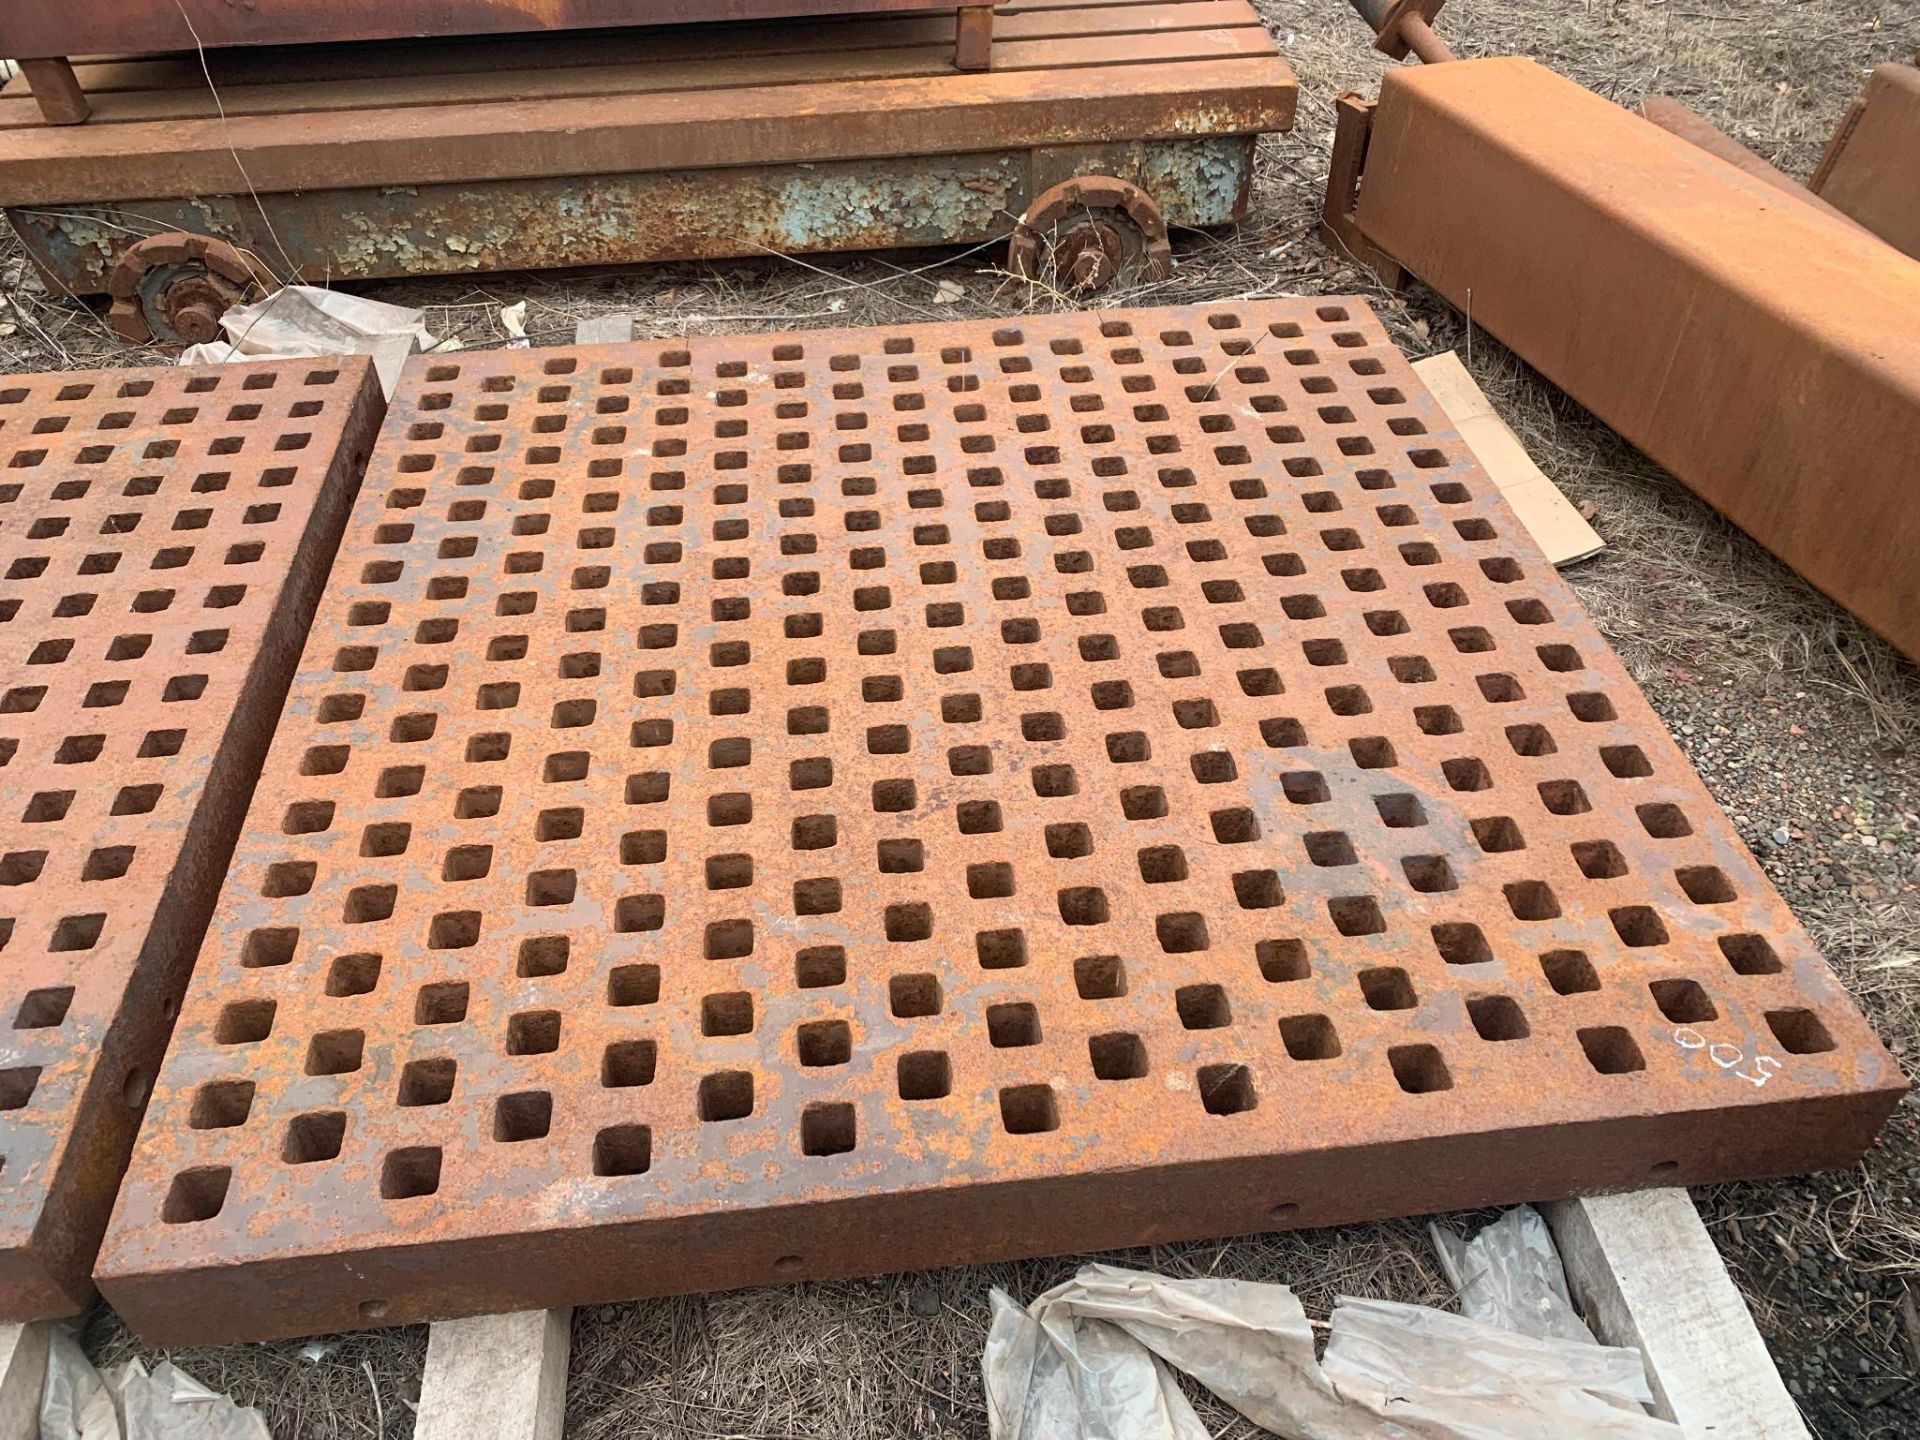 Acorn Style Welding Platen. Approx 61.5" x 61.5" x 5.25" deep with 2" square holes. Note: Small crac - Image 3 of 33